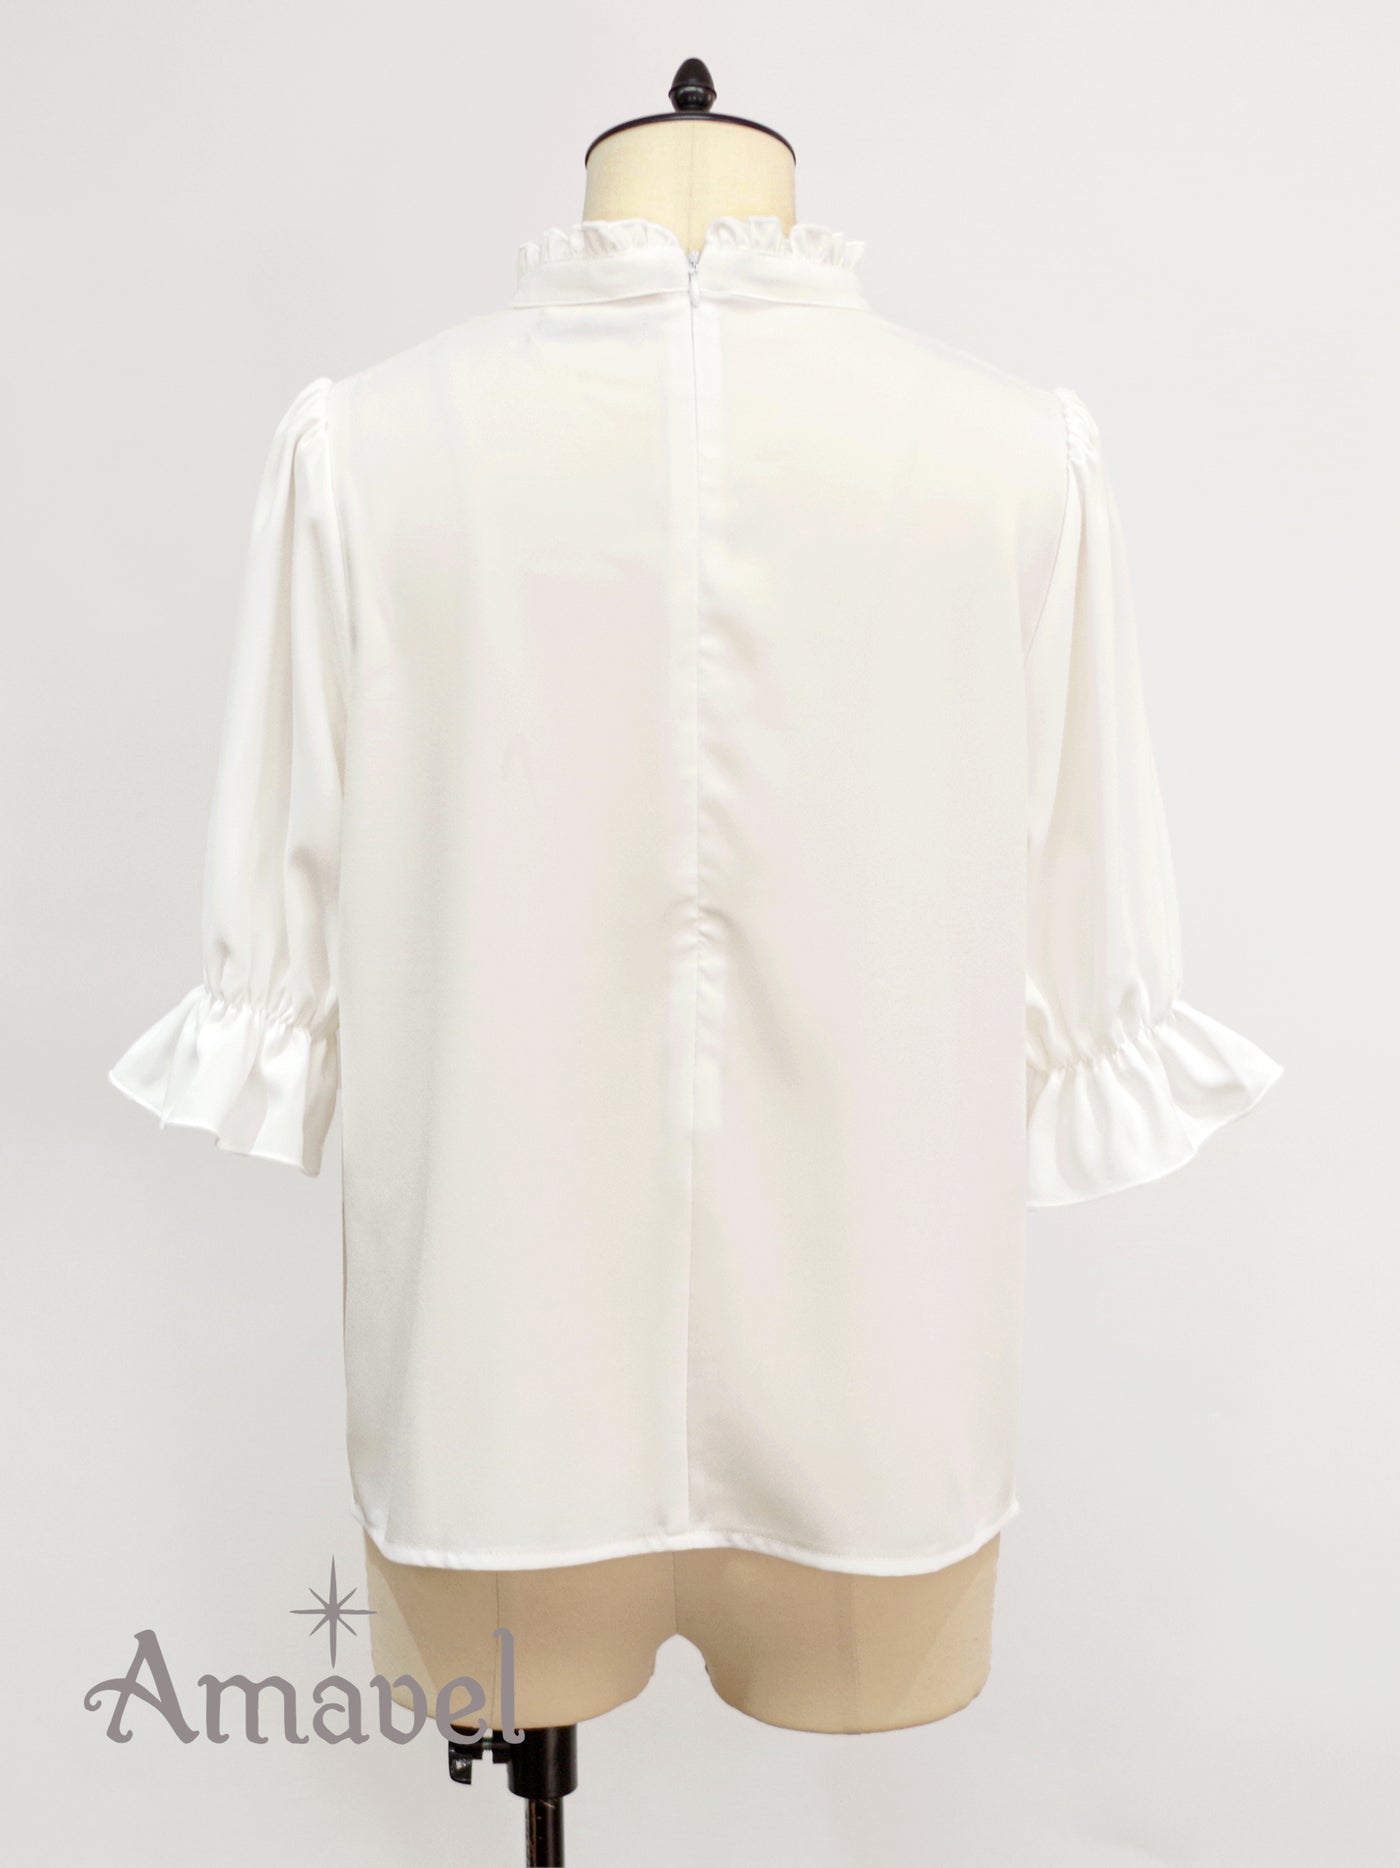 Girly frill decollete open blouse